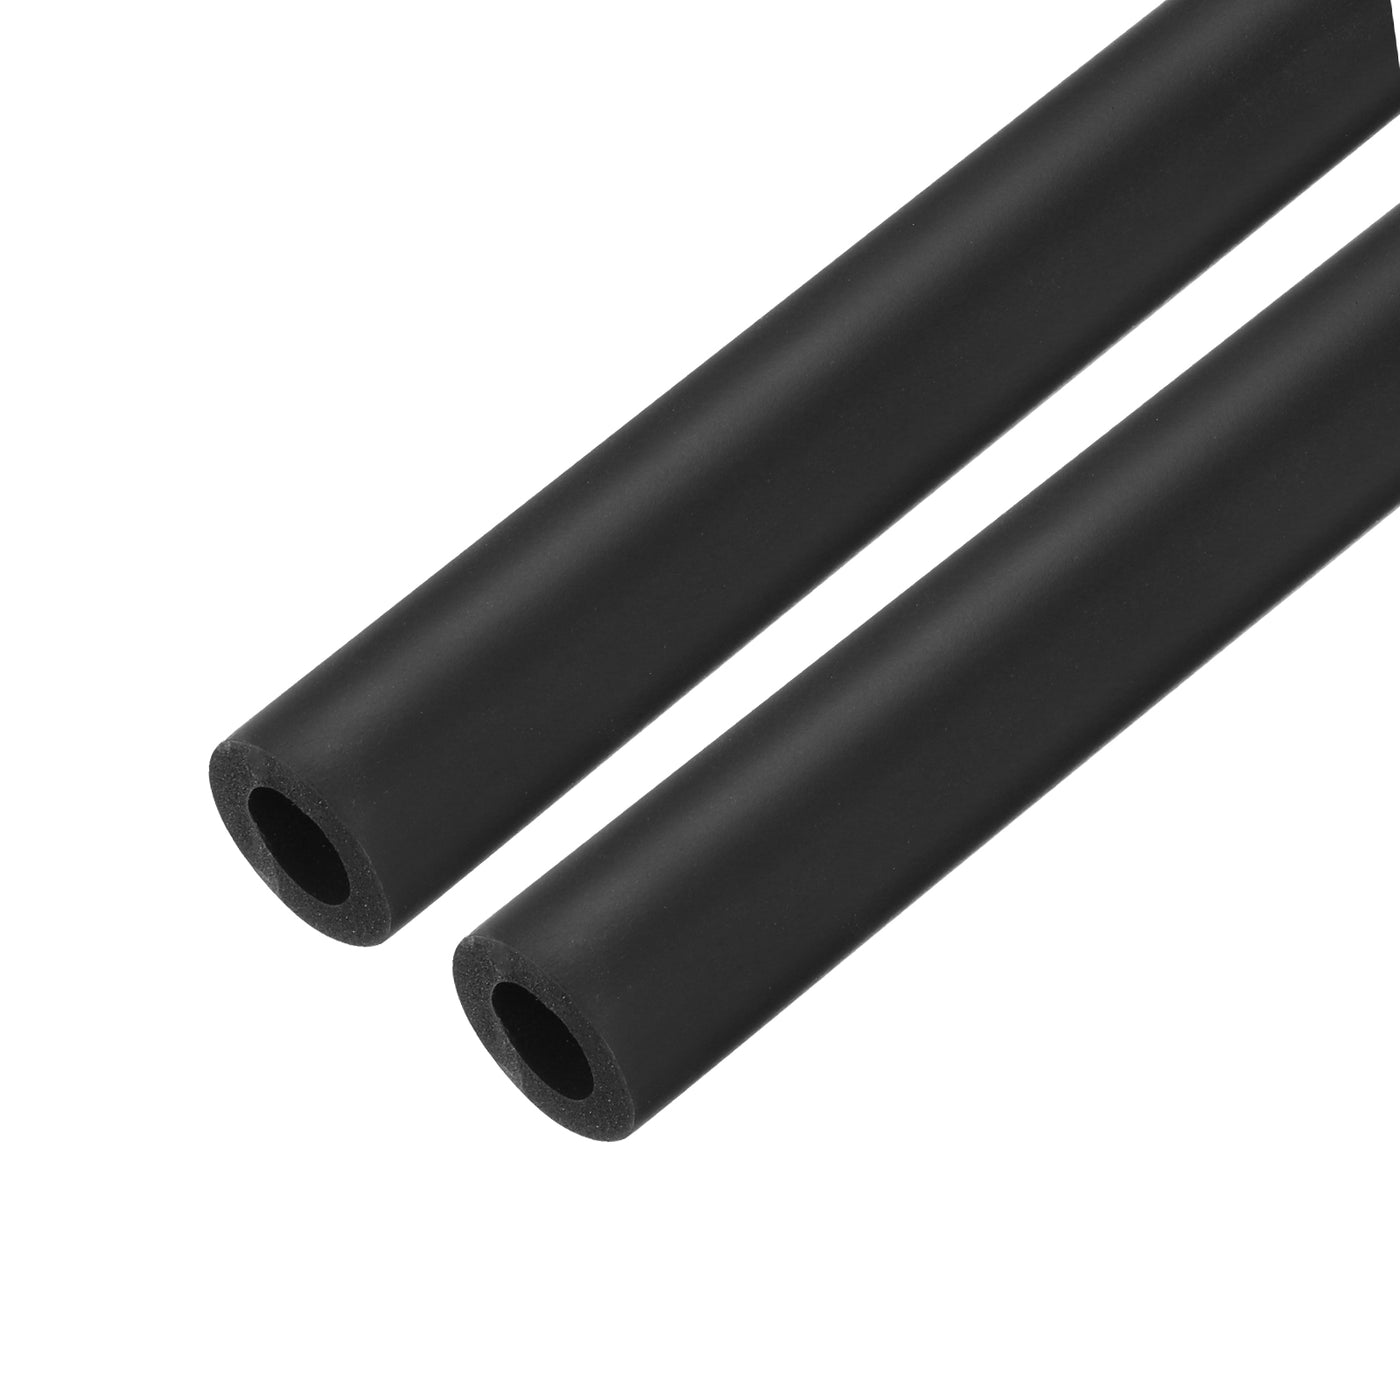 uxcell Uxcell 2pcs 3.3ft Pipe Insulation Tube 1/2 Inch(13mm) ID 23mm OD Foam Tubing for Handle Grip Support, Black